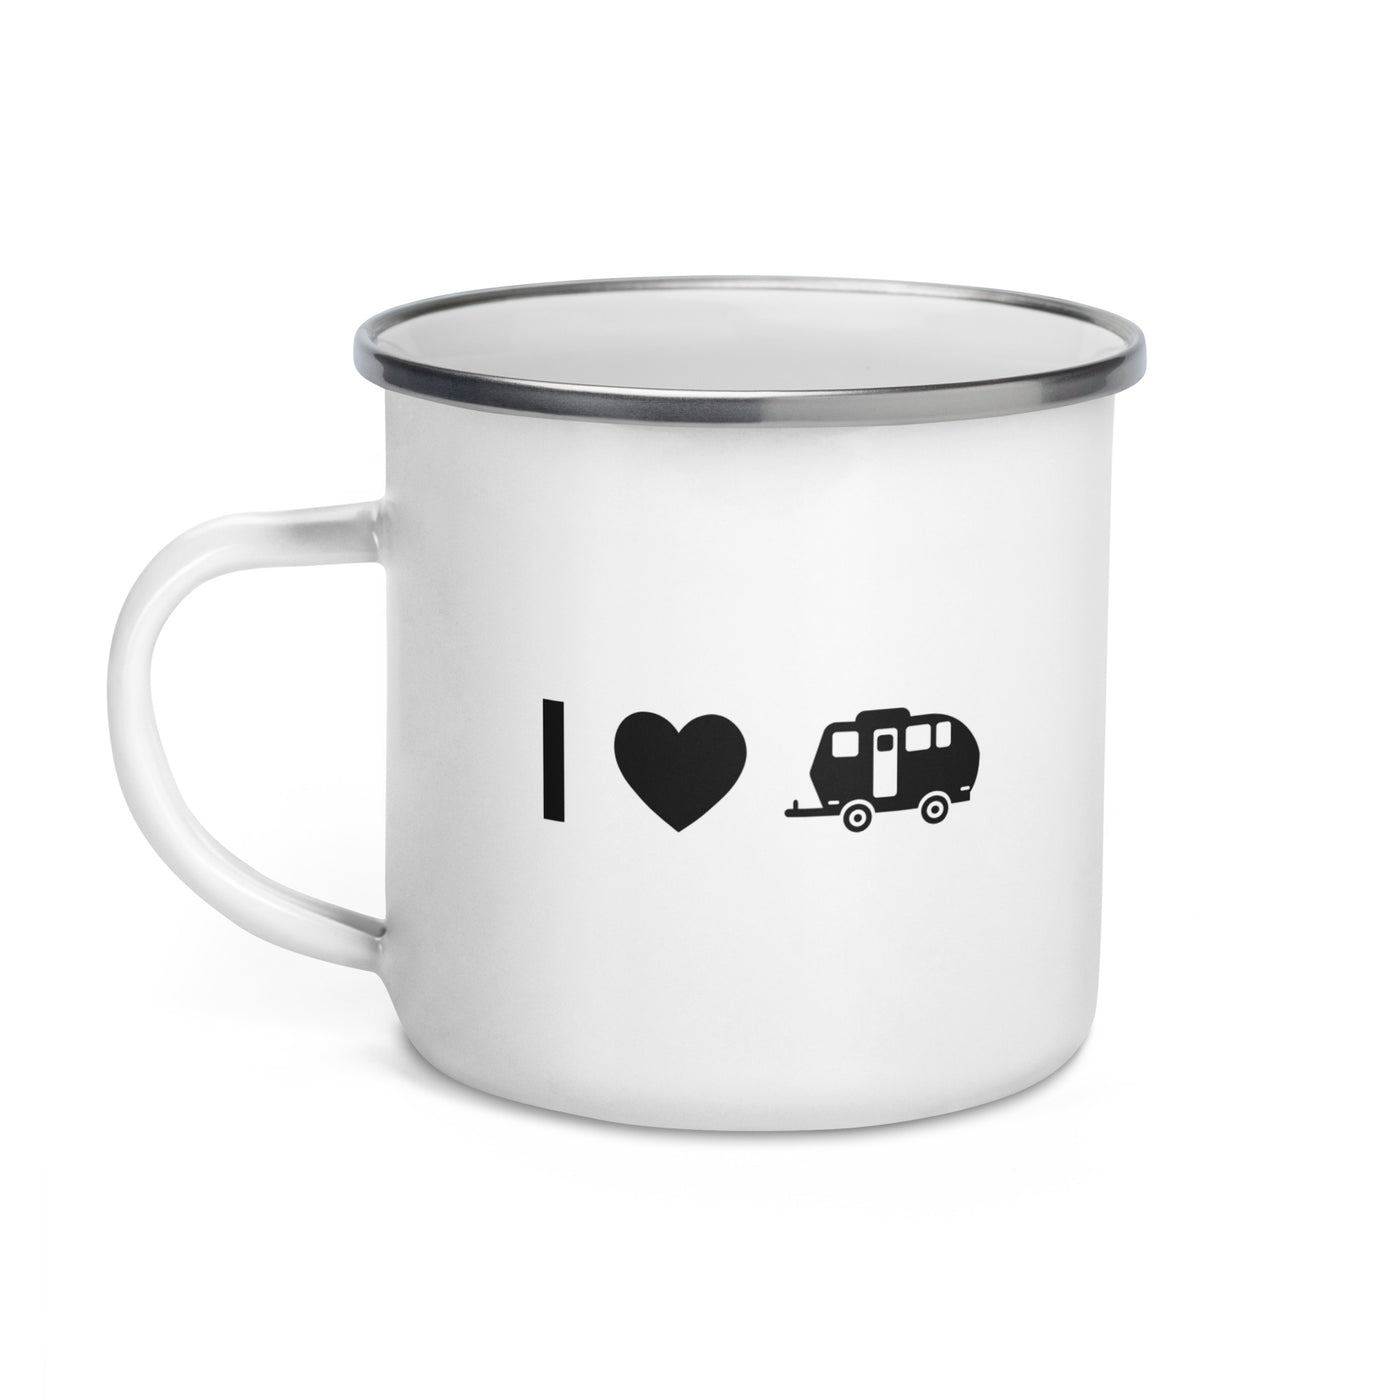 I Heart And Camping Caravan - Emaille Tasse camping